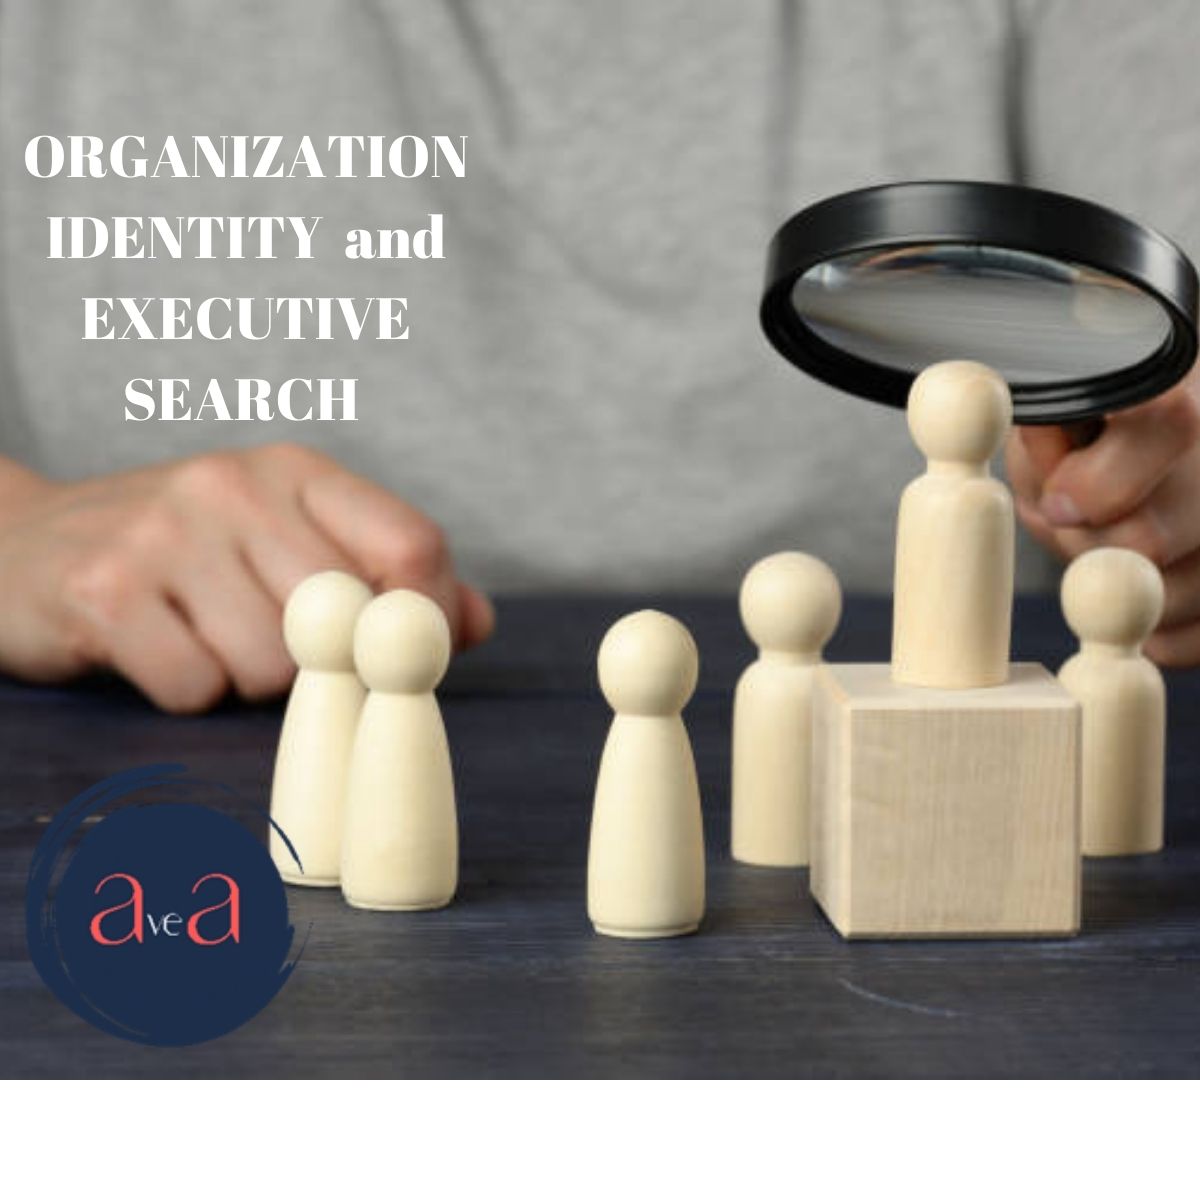 Organizational Identity and Executive Search